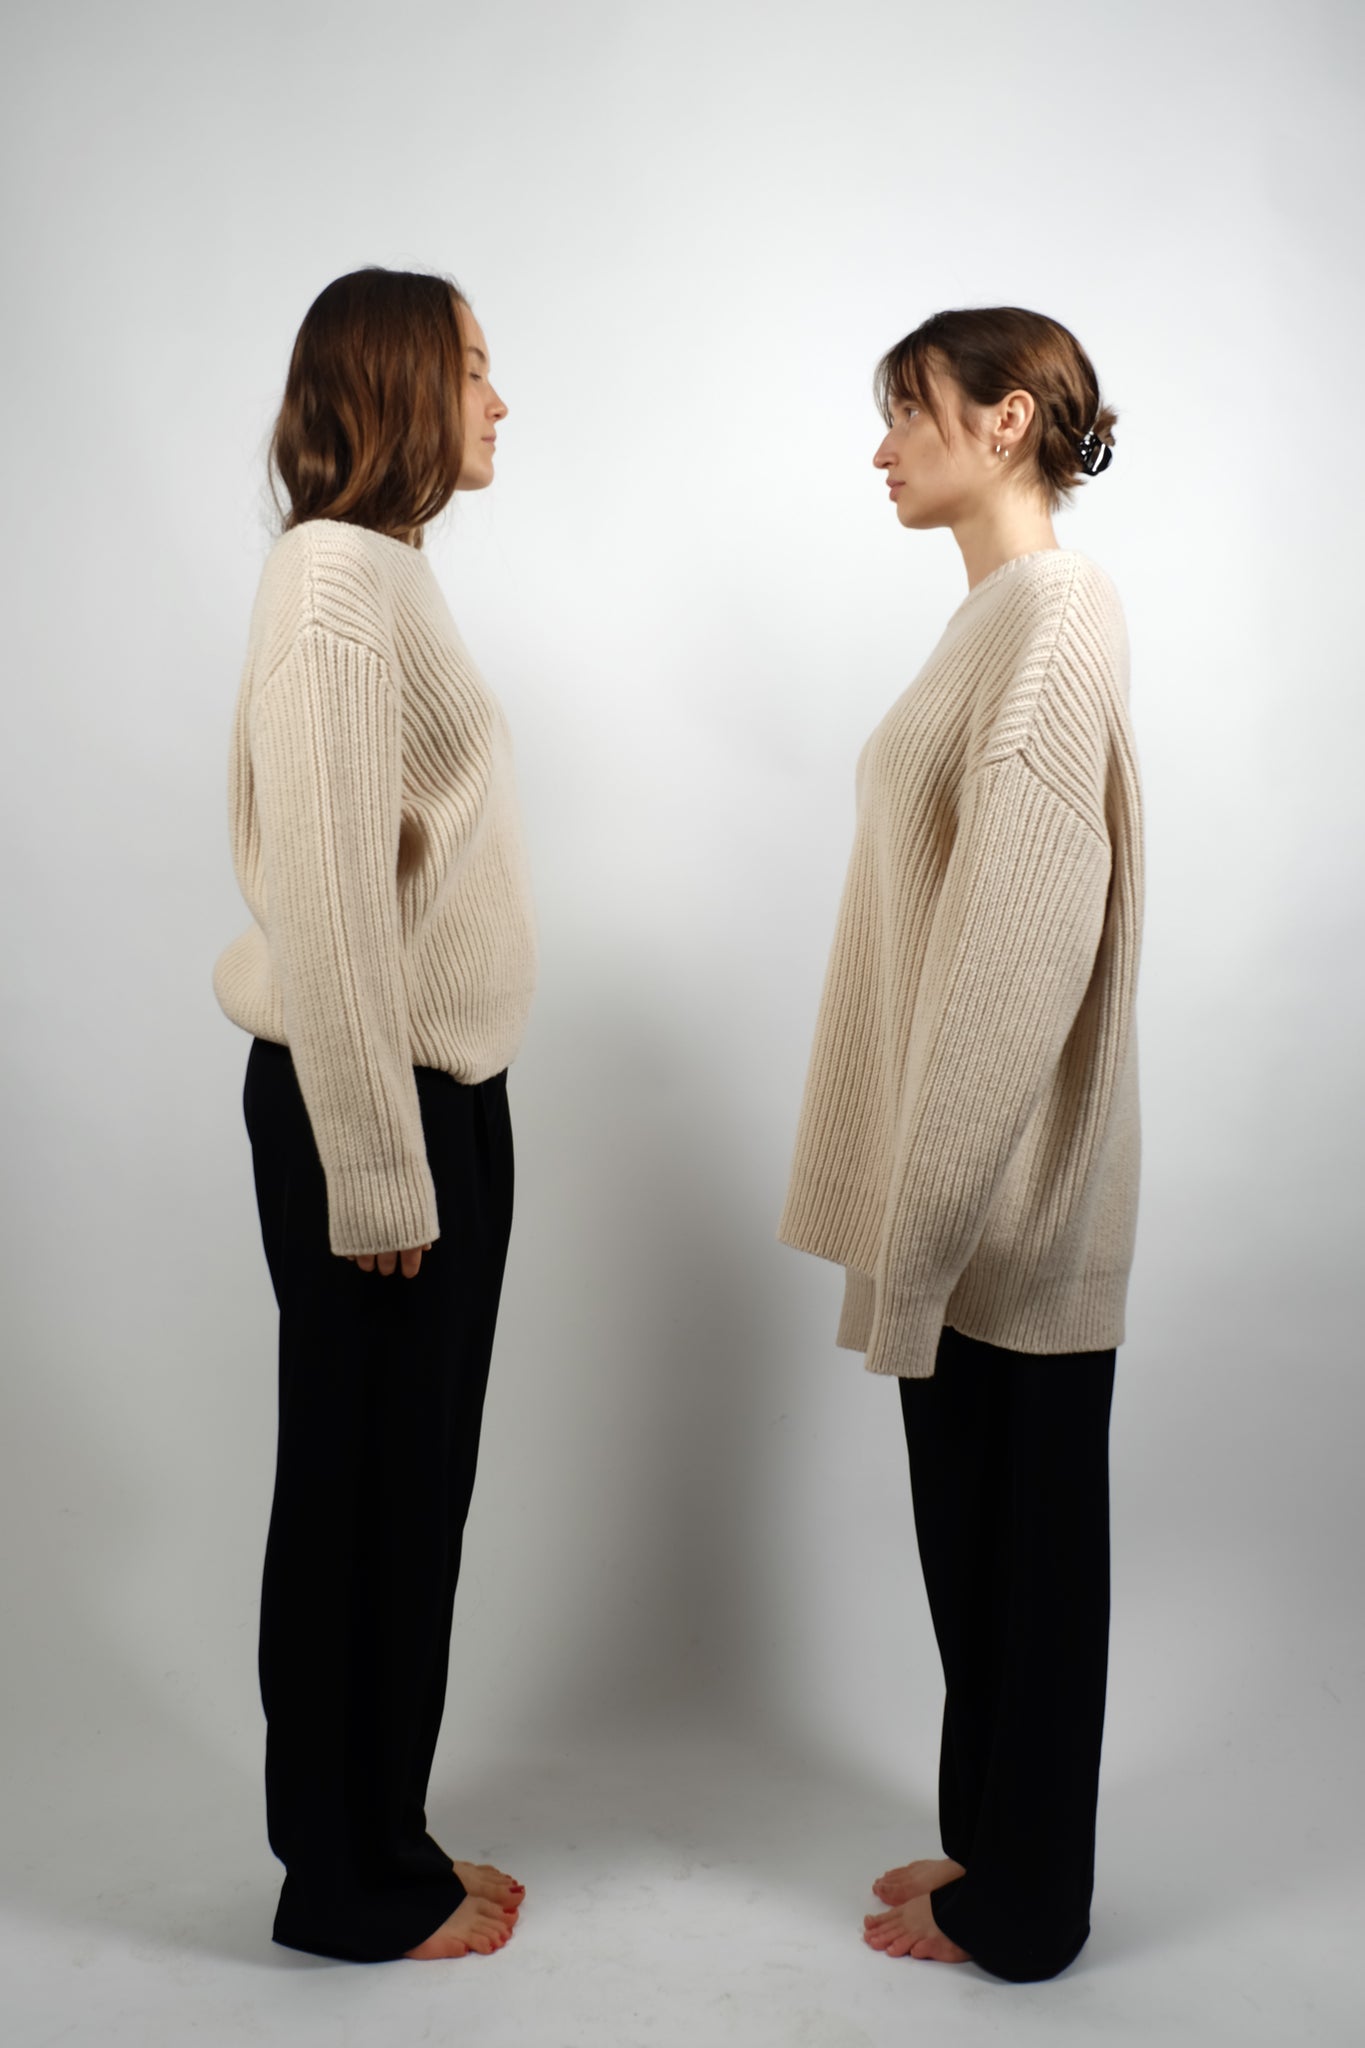 CHUNKY UNISEX KNIT PULLOVER IN OFF-WHITE BY CAN PEP REY